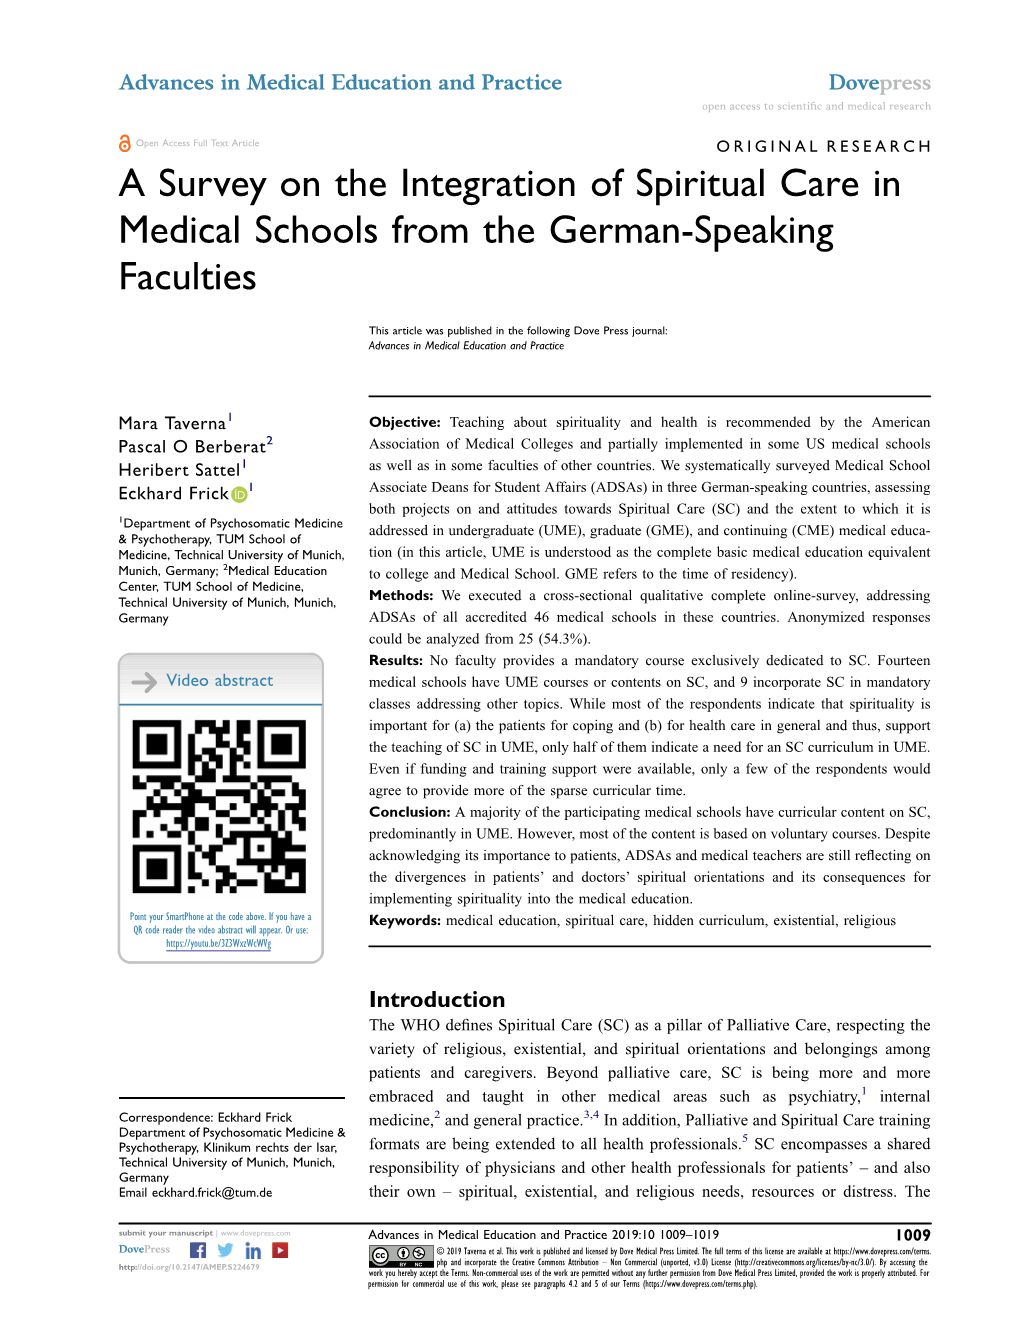 A Survey on the Integration of Spiritual Care in Medical Schools from the German-Speaking Faculties